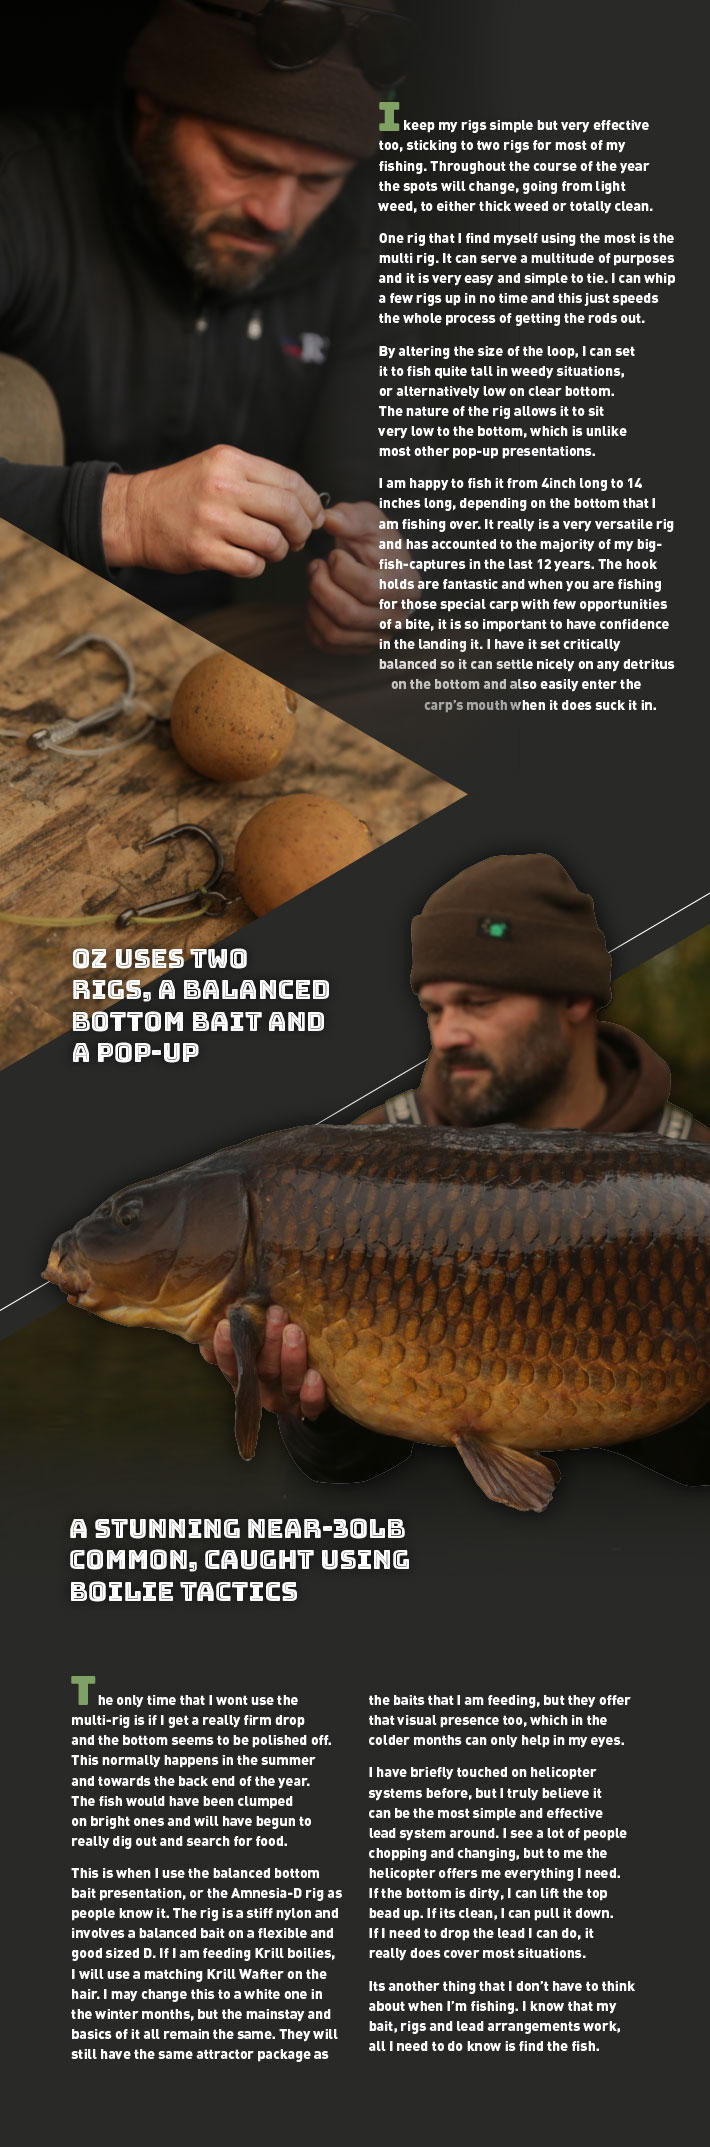 Vouwen een Bekwaam Thinking Anglers Articles - Big Boilies for Big Carp by Oz Holness